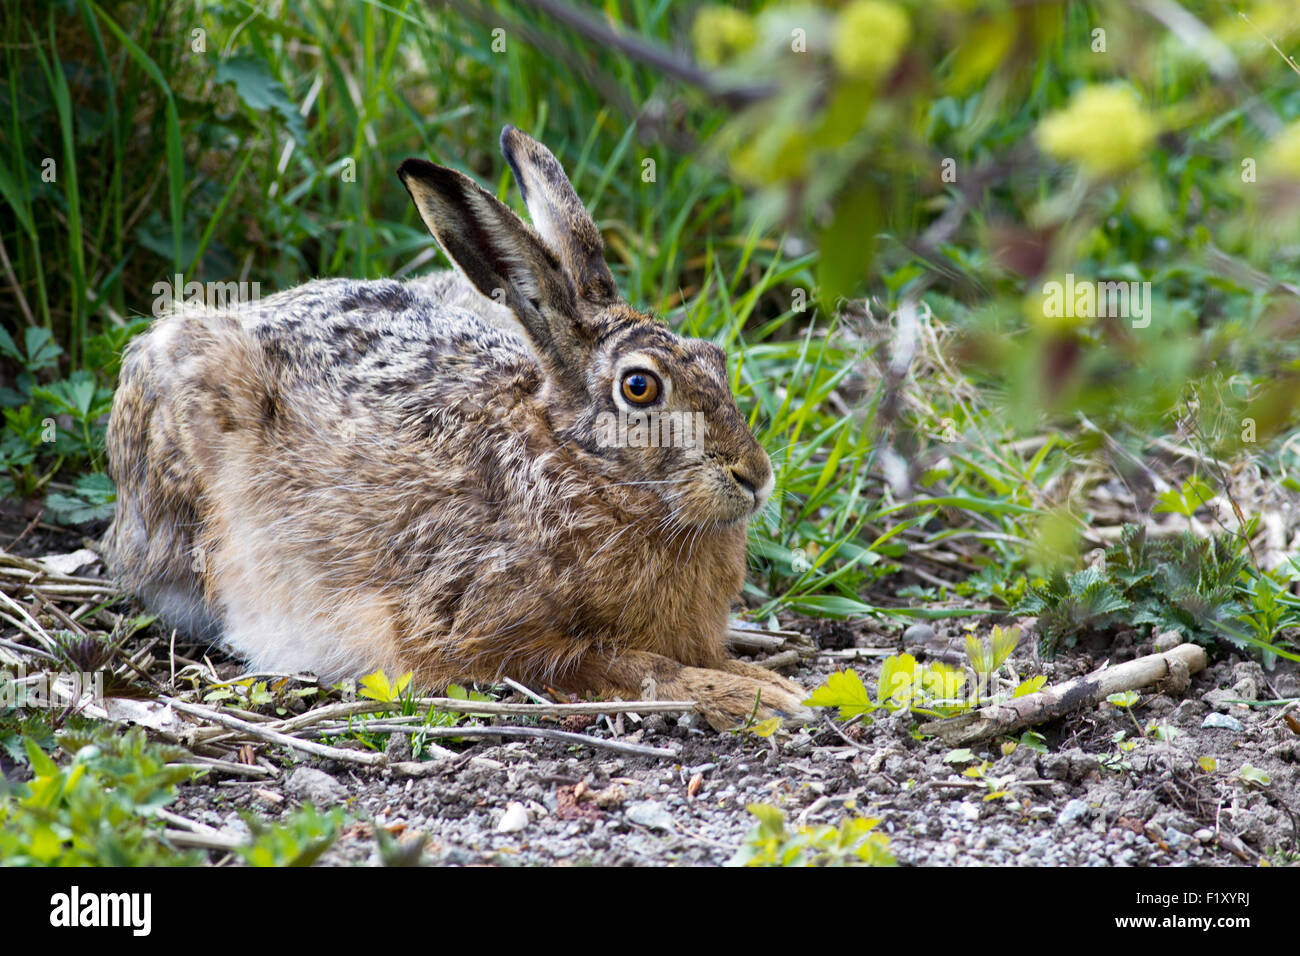 Rabbit with big ears is resting Stock Photo